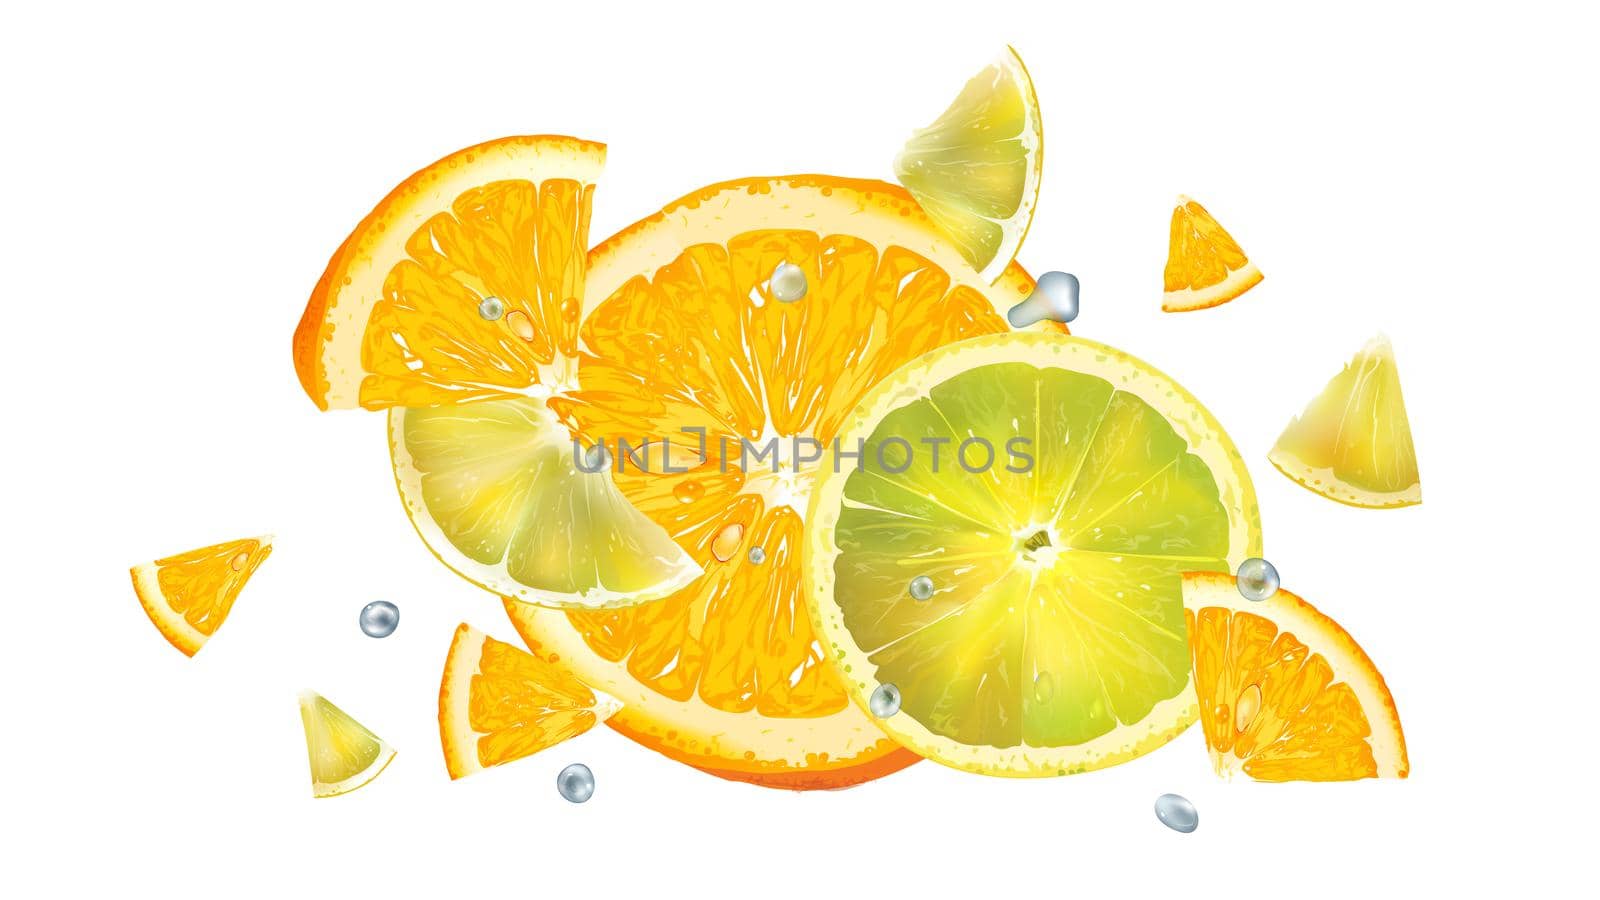 Orange and lemon slices and water droplets in flight. by ConceptCafe